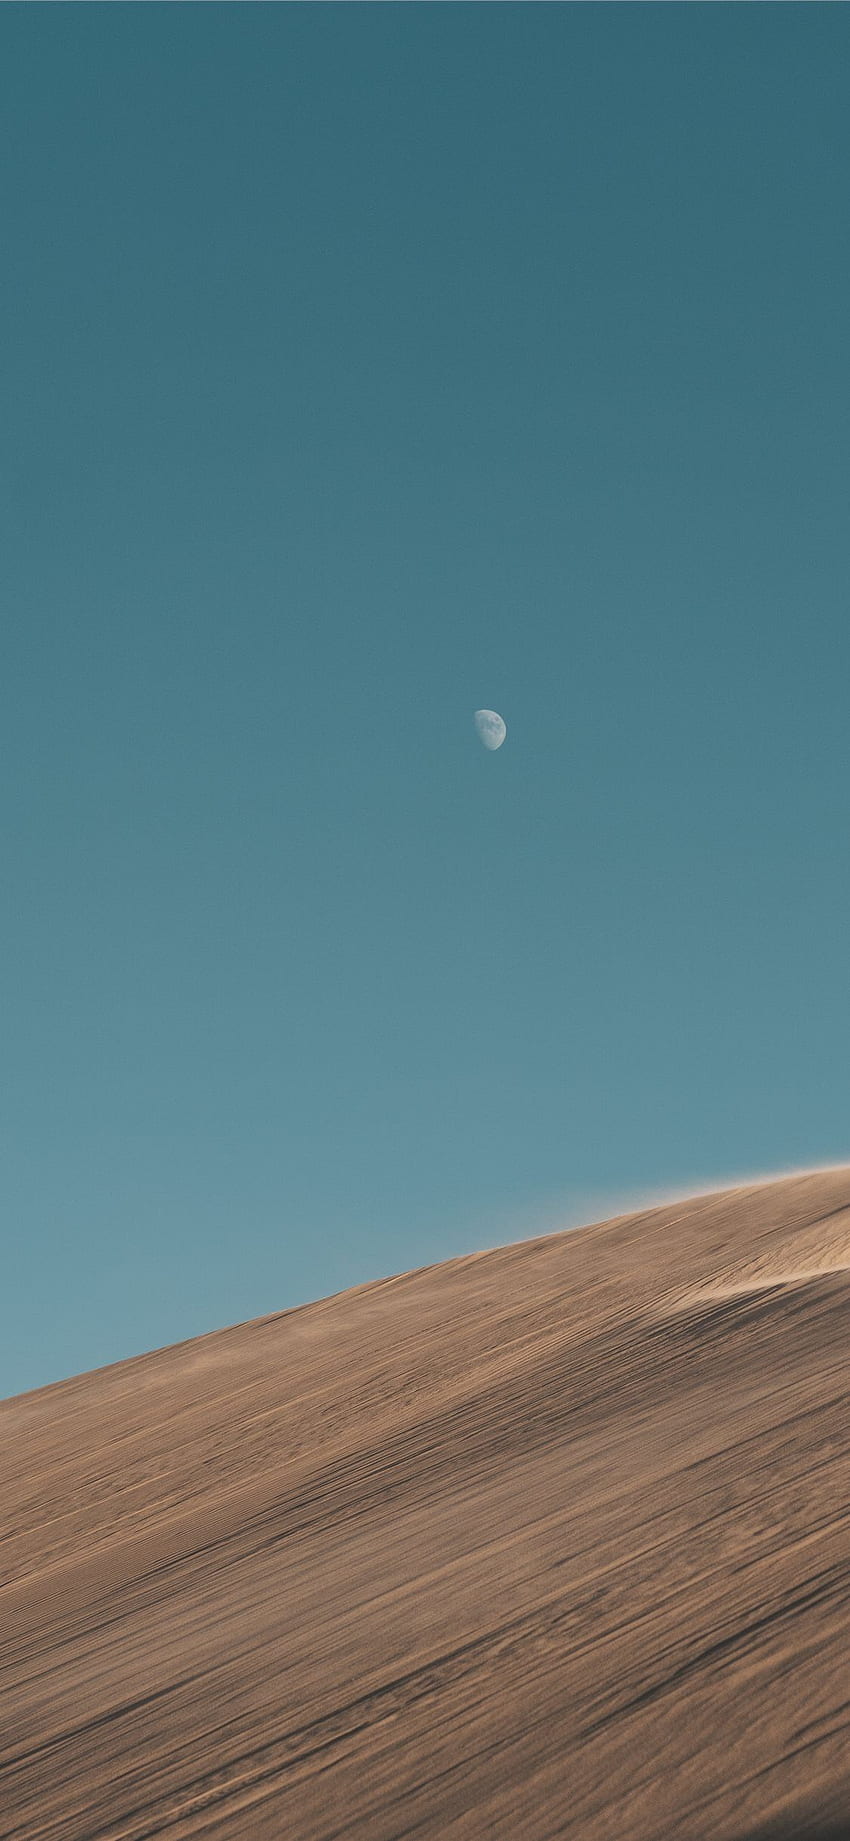 A person riding on top of sand dunes - Desert